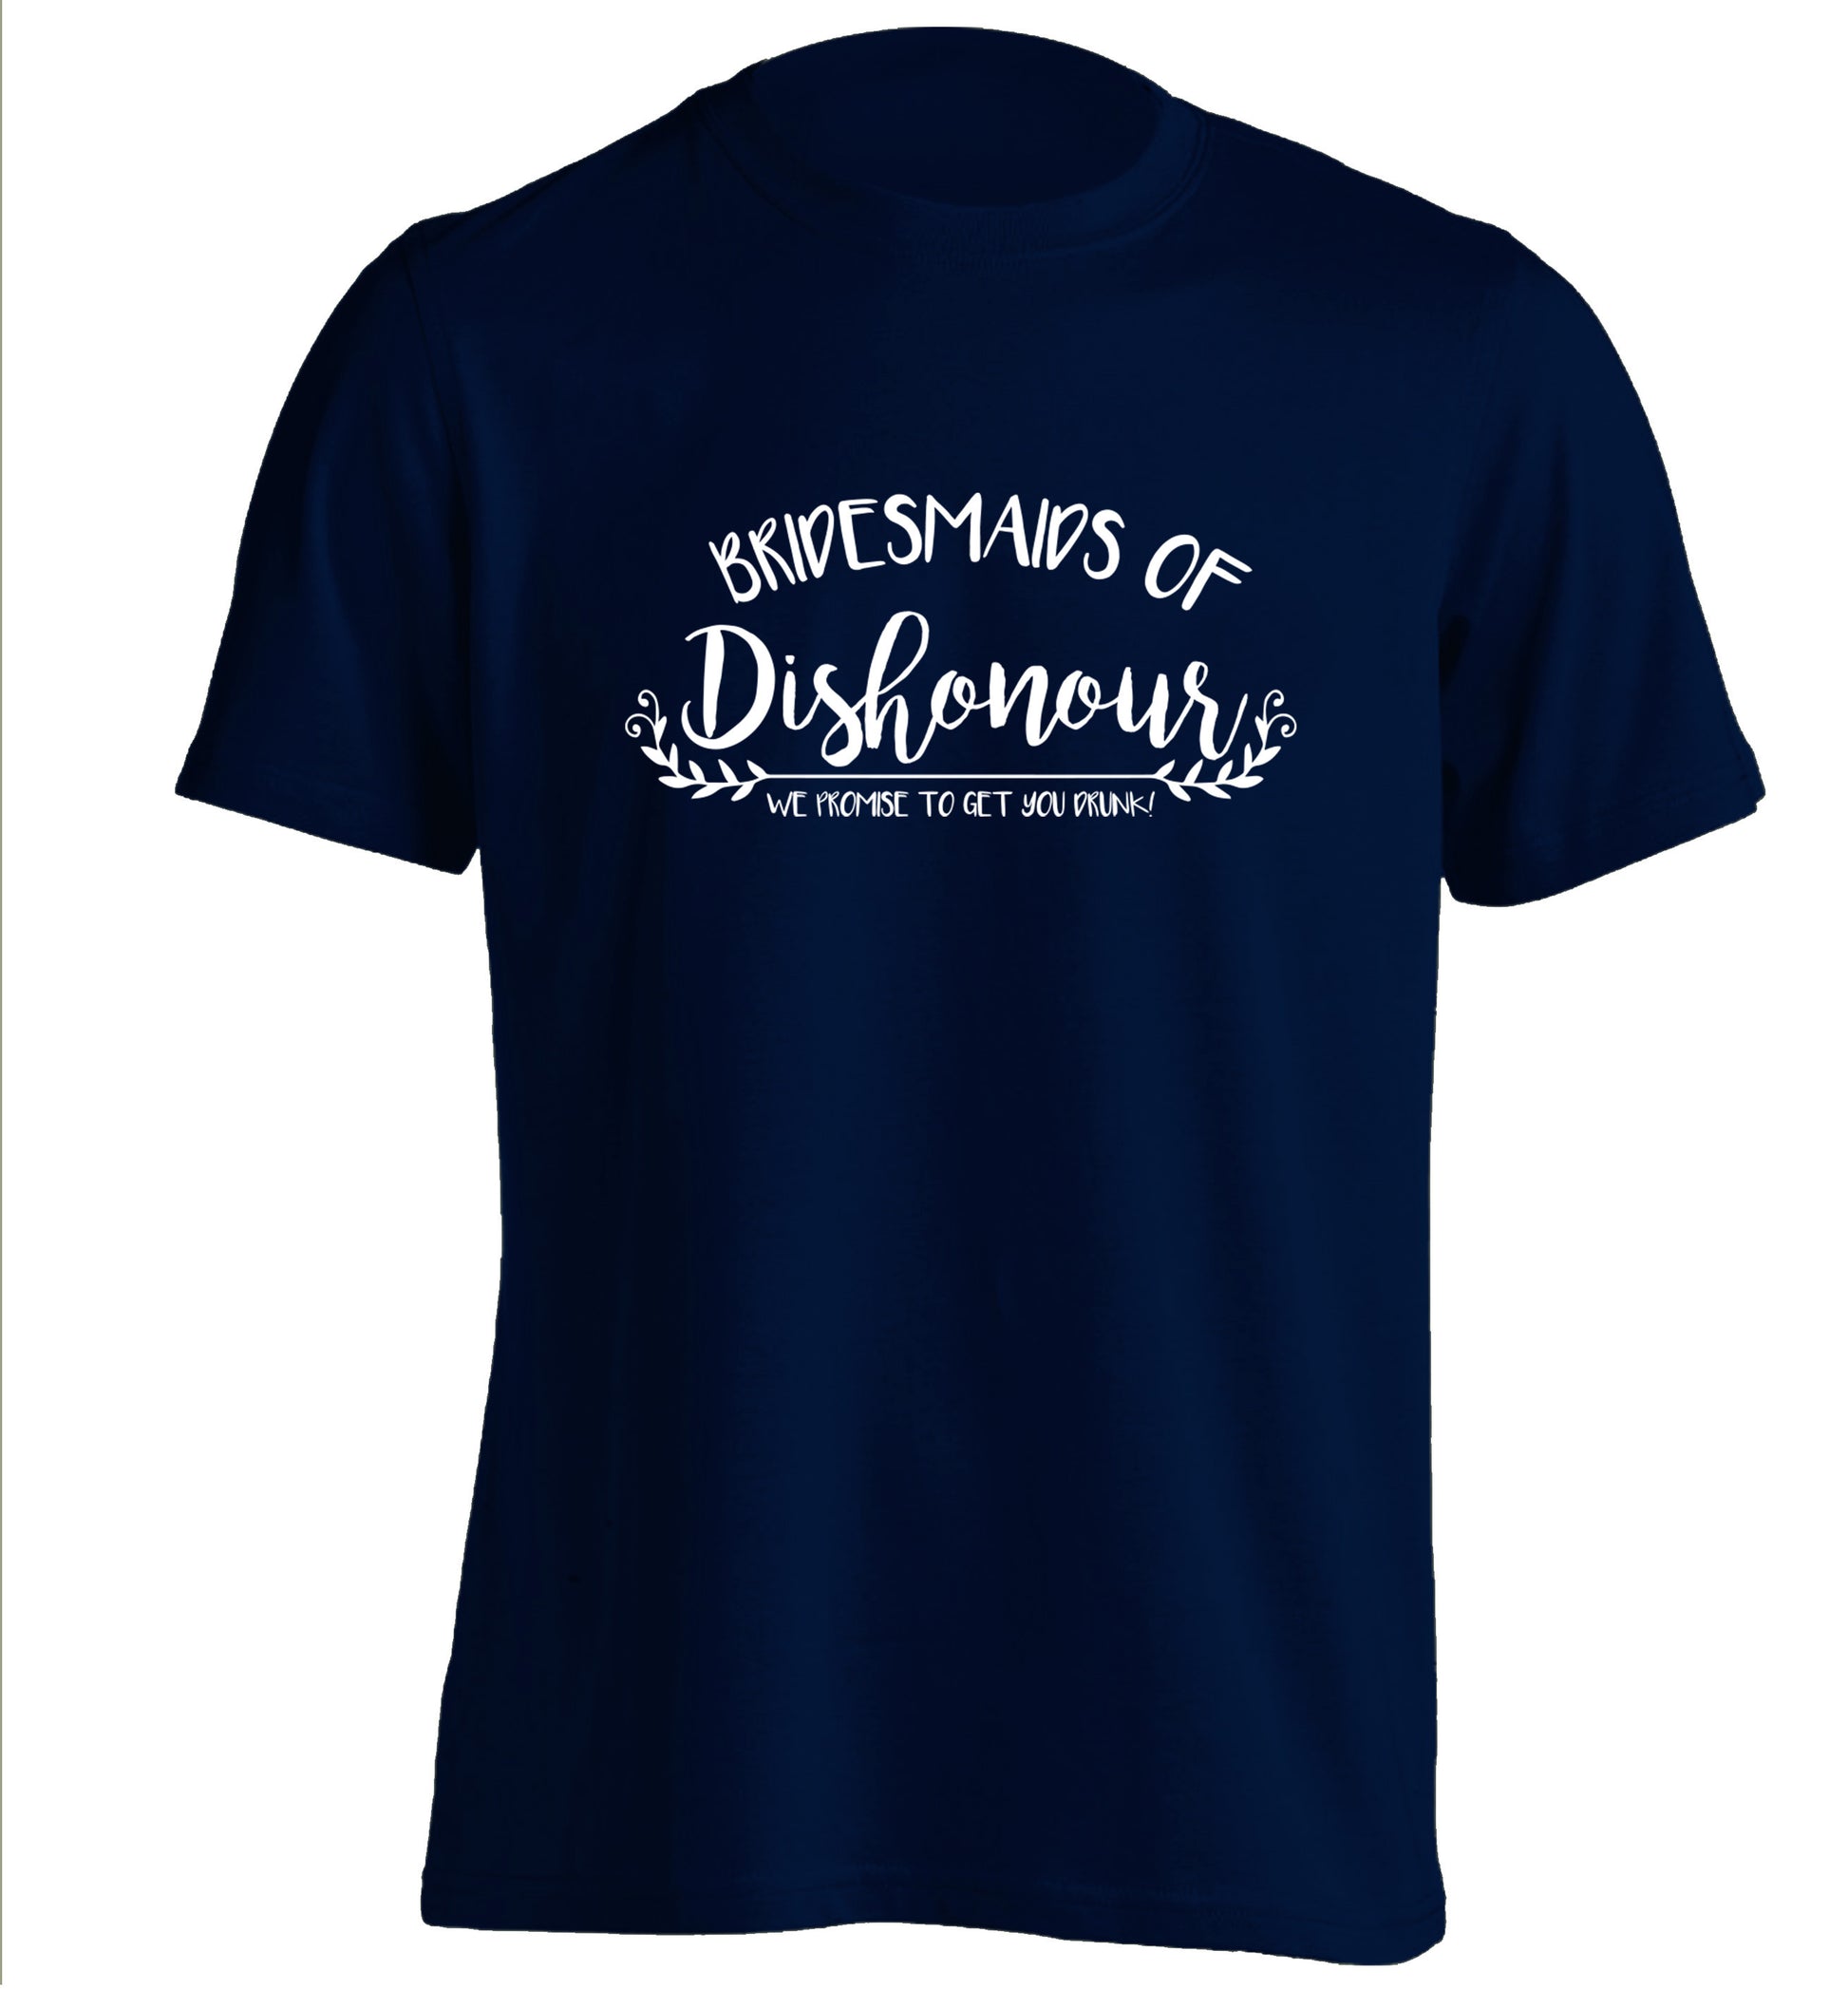 Bridesmaids of Dishonour we promise to get you drunk! adults unisex navy Tshirt 2XL